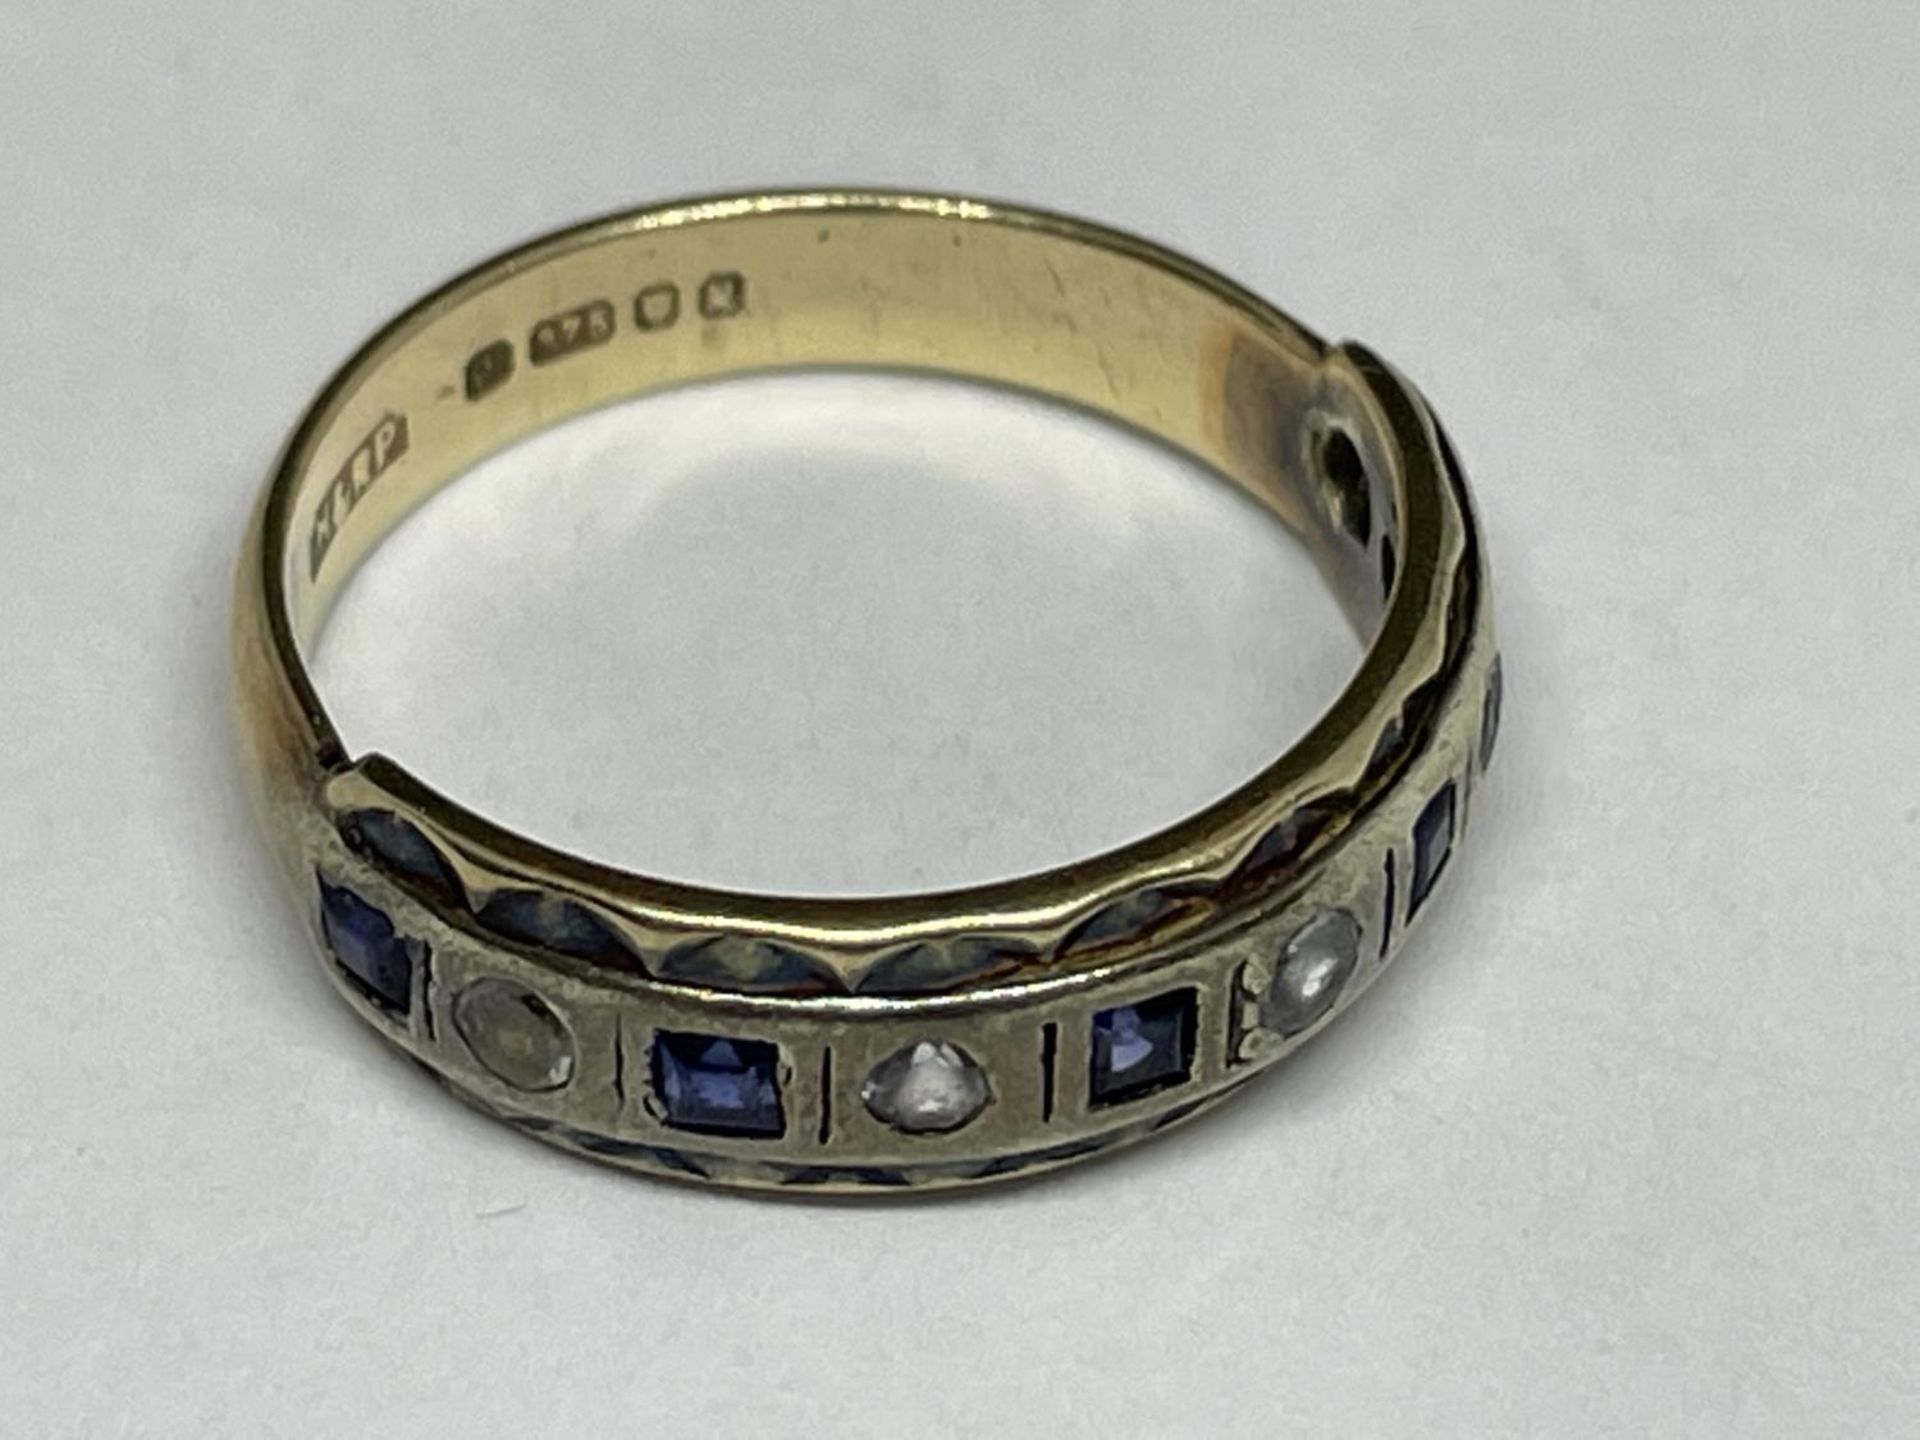 A 9 CARAT GOLD RING WITH FIVE SQUARE SAPPHIRES AND FIVE CLEAR STONES IN A BAND SIZE K - Image 4 of 4